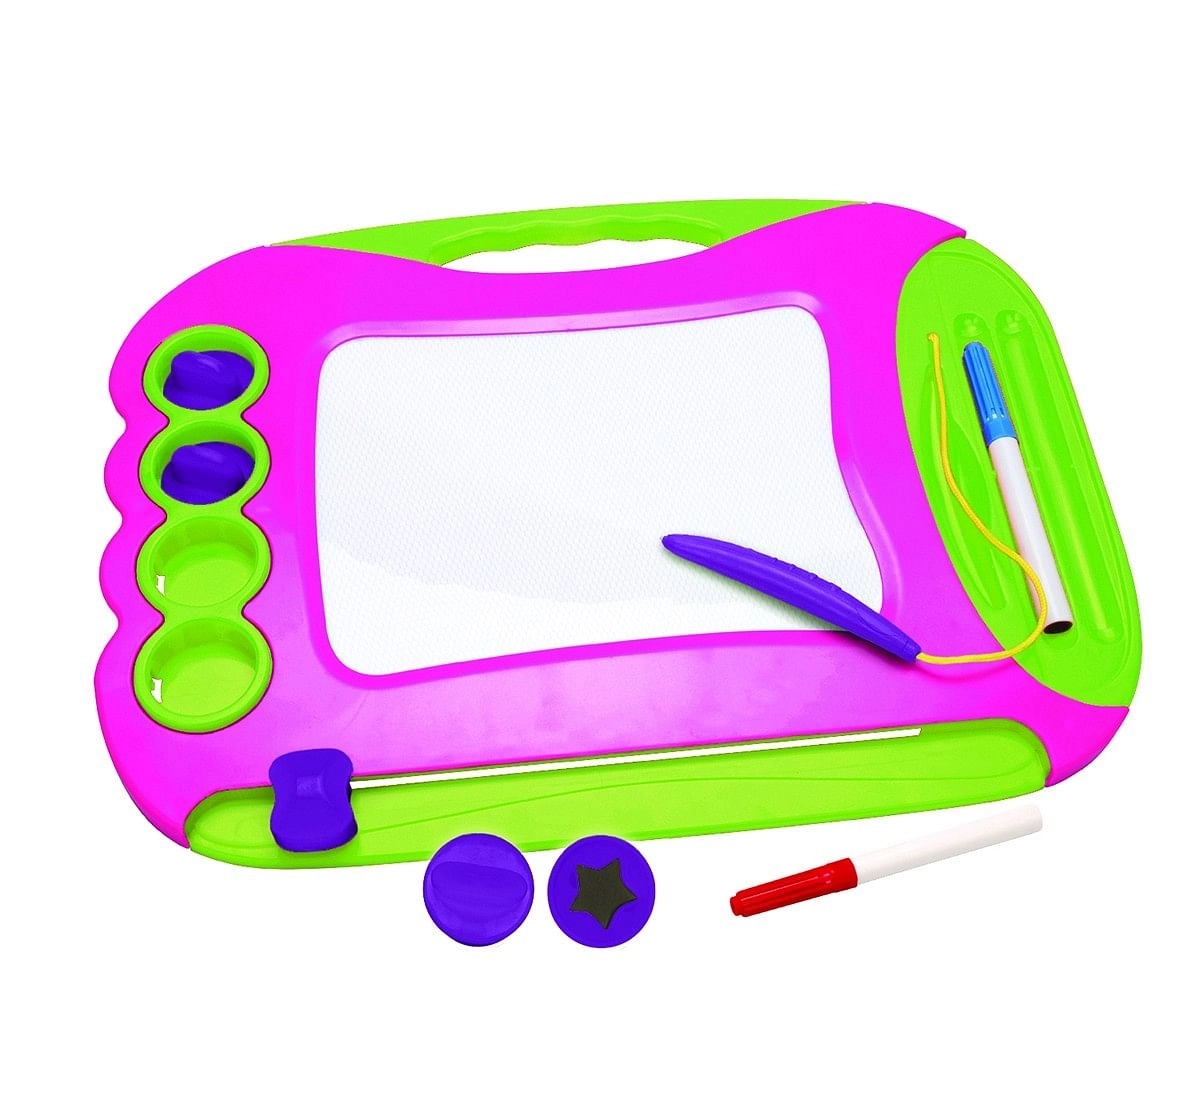 Youreka 2 in1 Magic Writer - Pink Activity Table & Boards for Kids age 18M + (Blue)